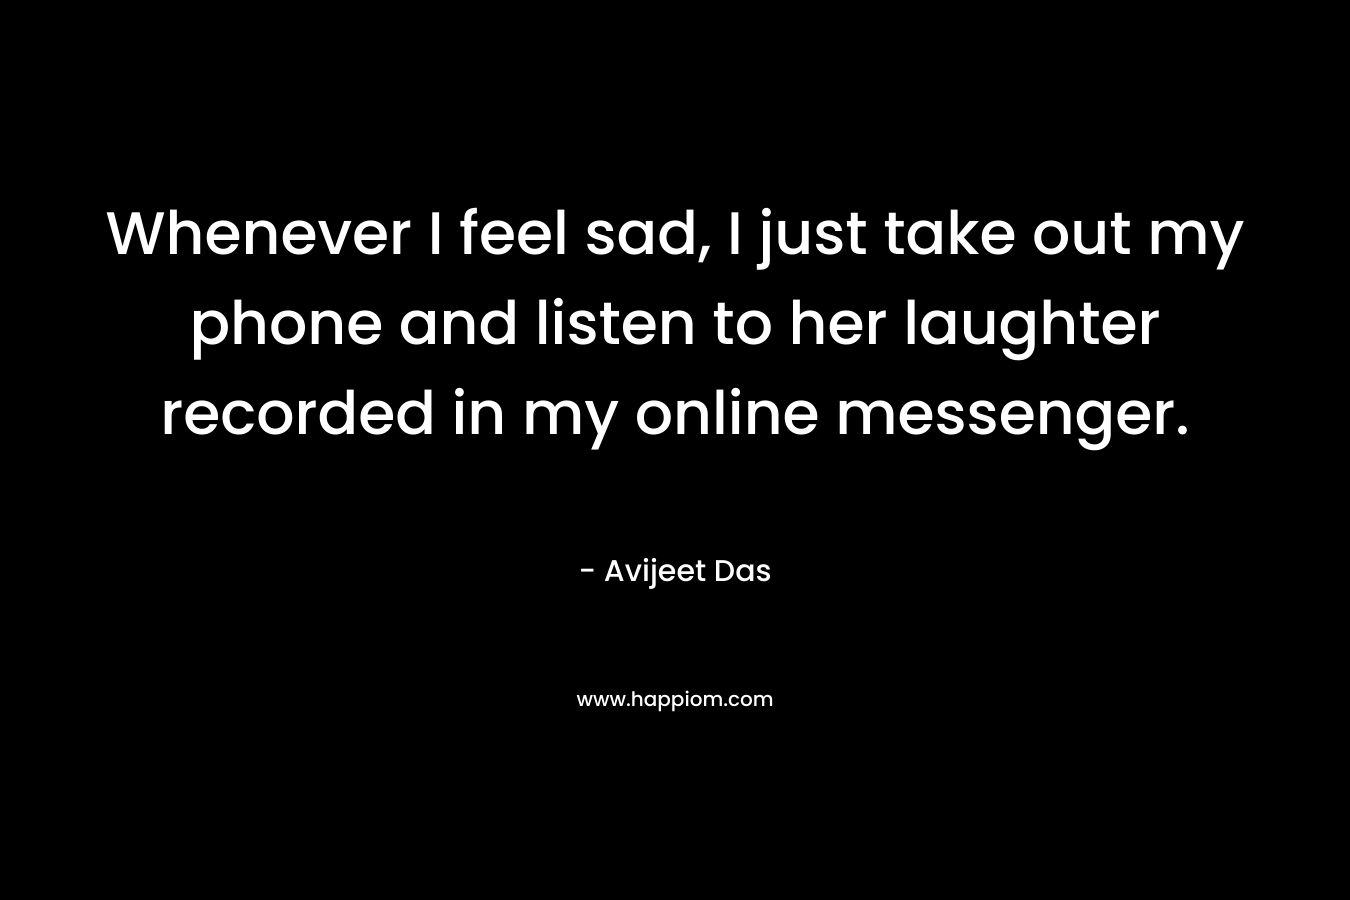 Whenever I feel sad, I just take out my phone and listen to her laughter recorded in my online messenger.